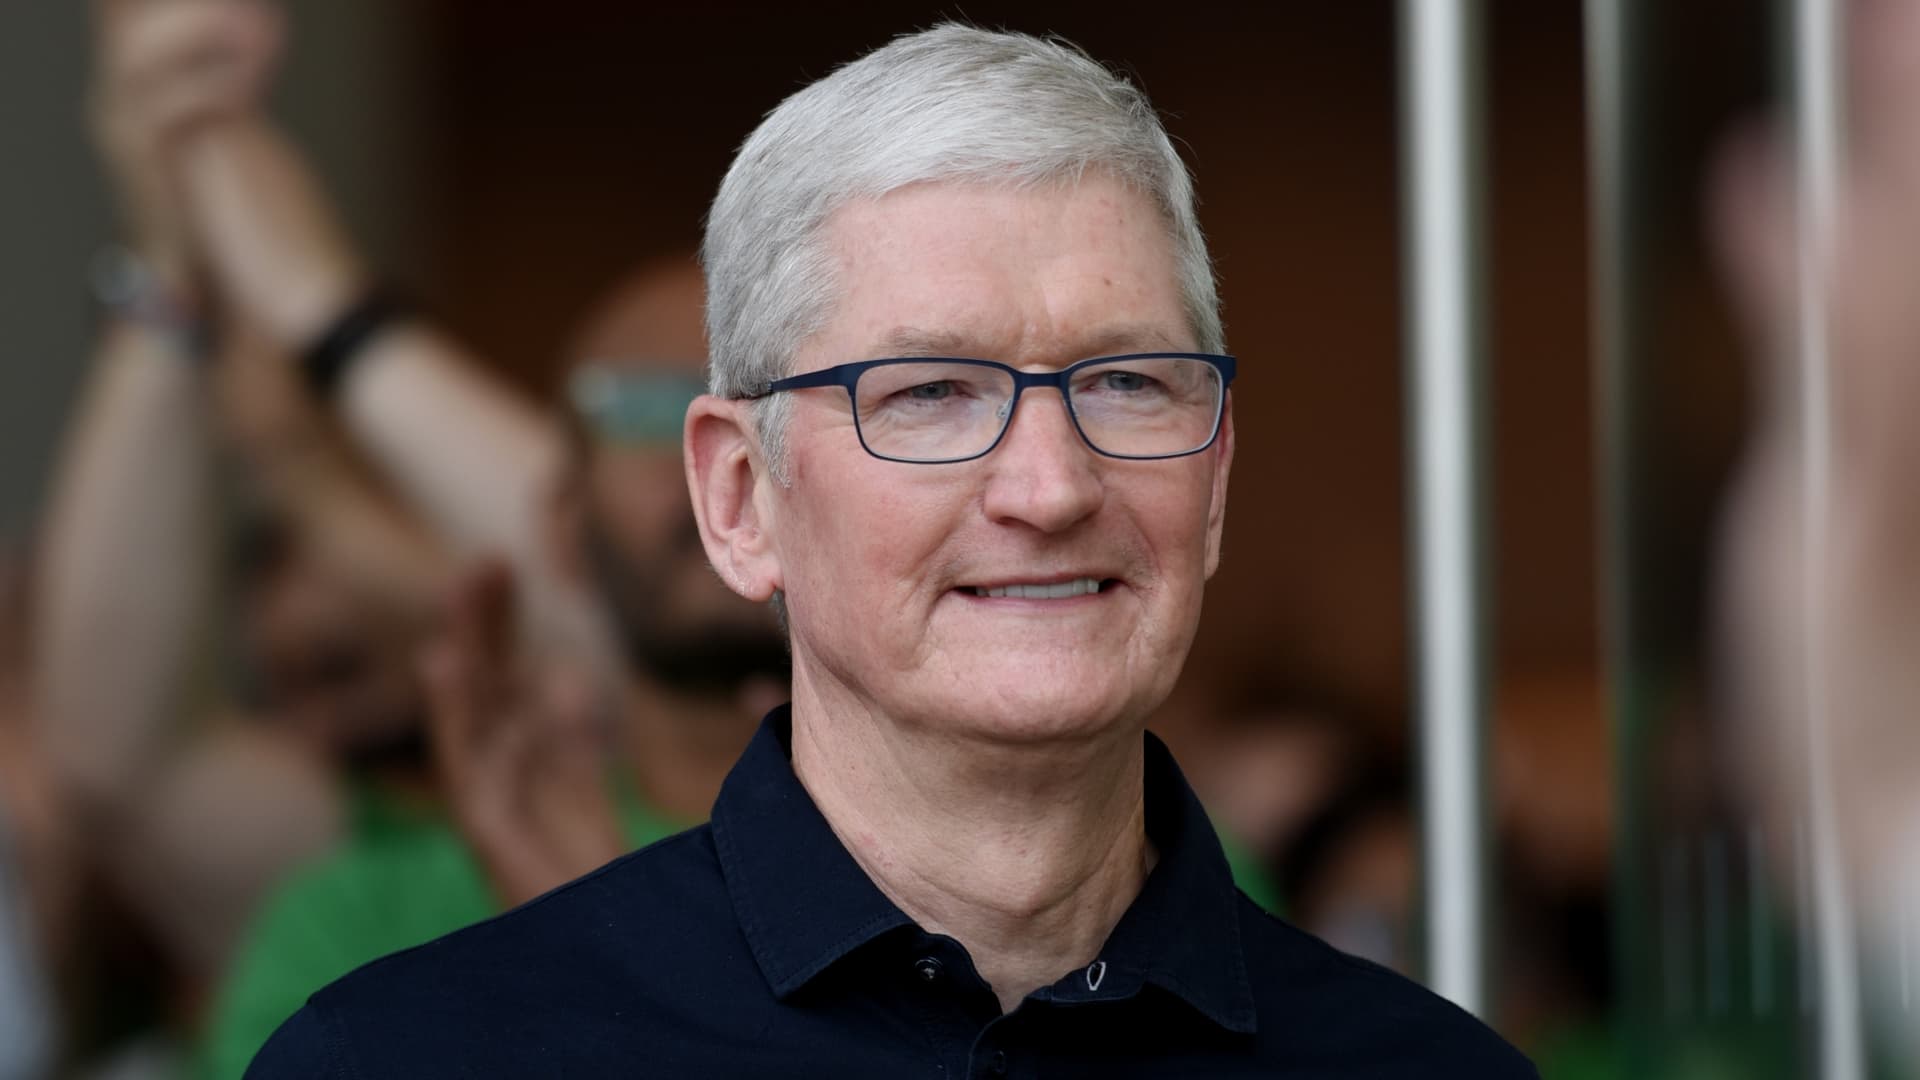 CEO Tim Cook says layoffs are a 'last resort' and not something Apple is considering right now